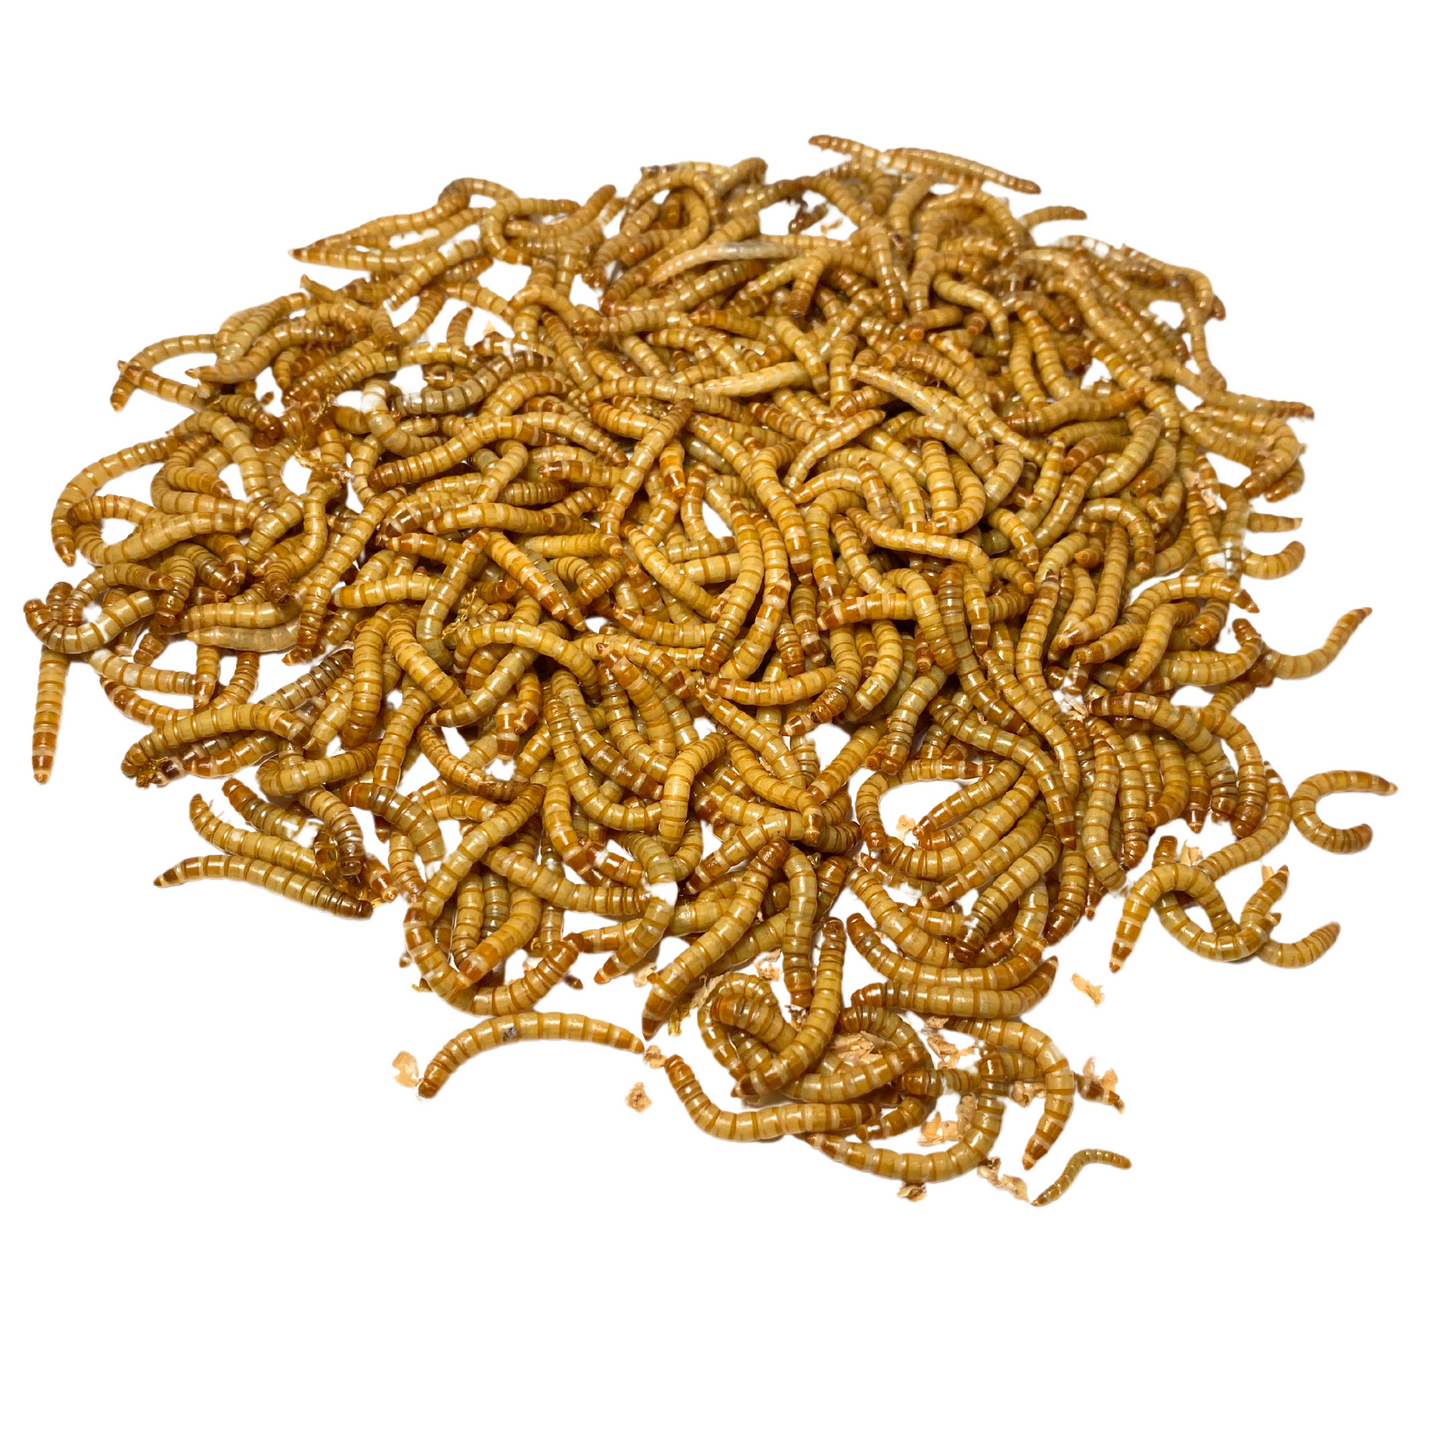 2,000 Live Mealworms